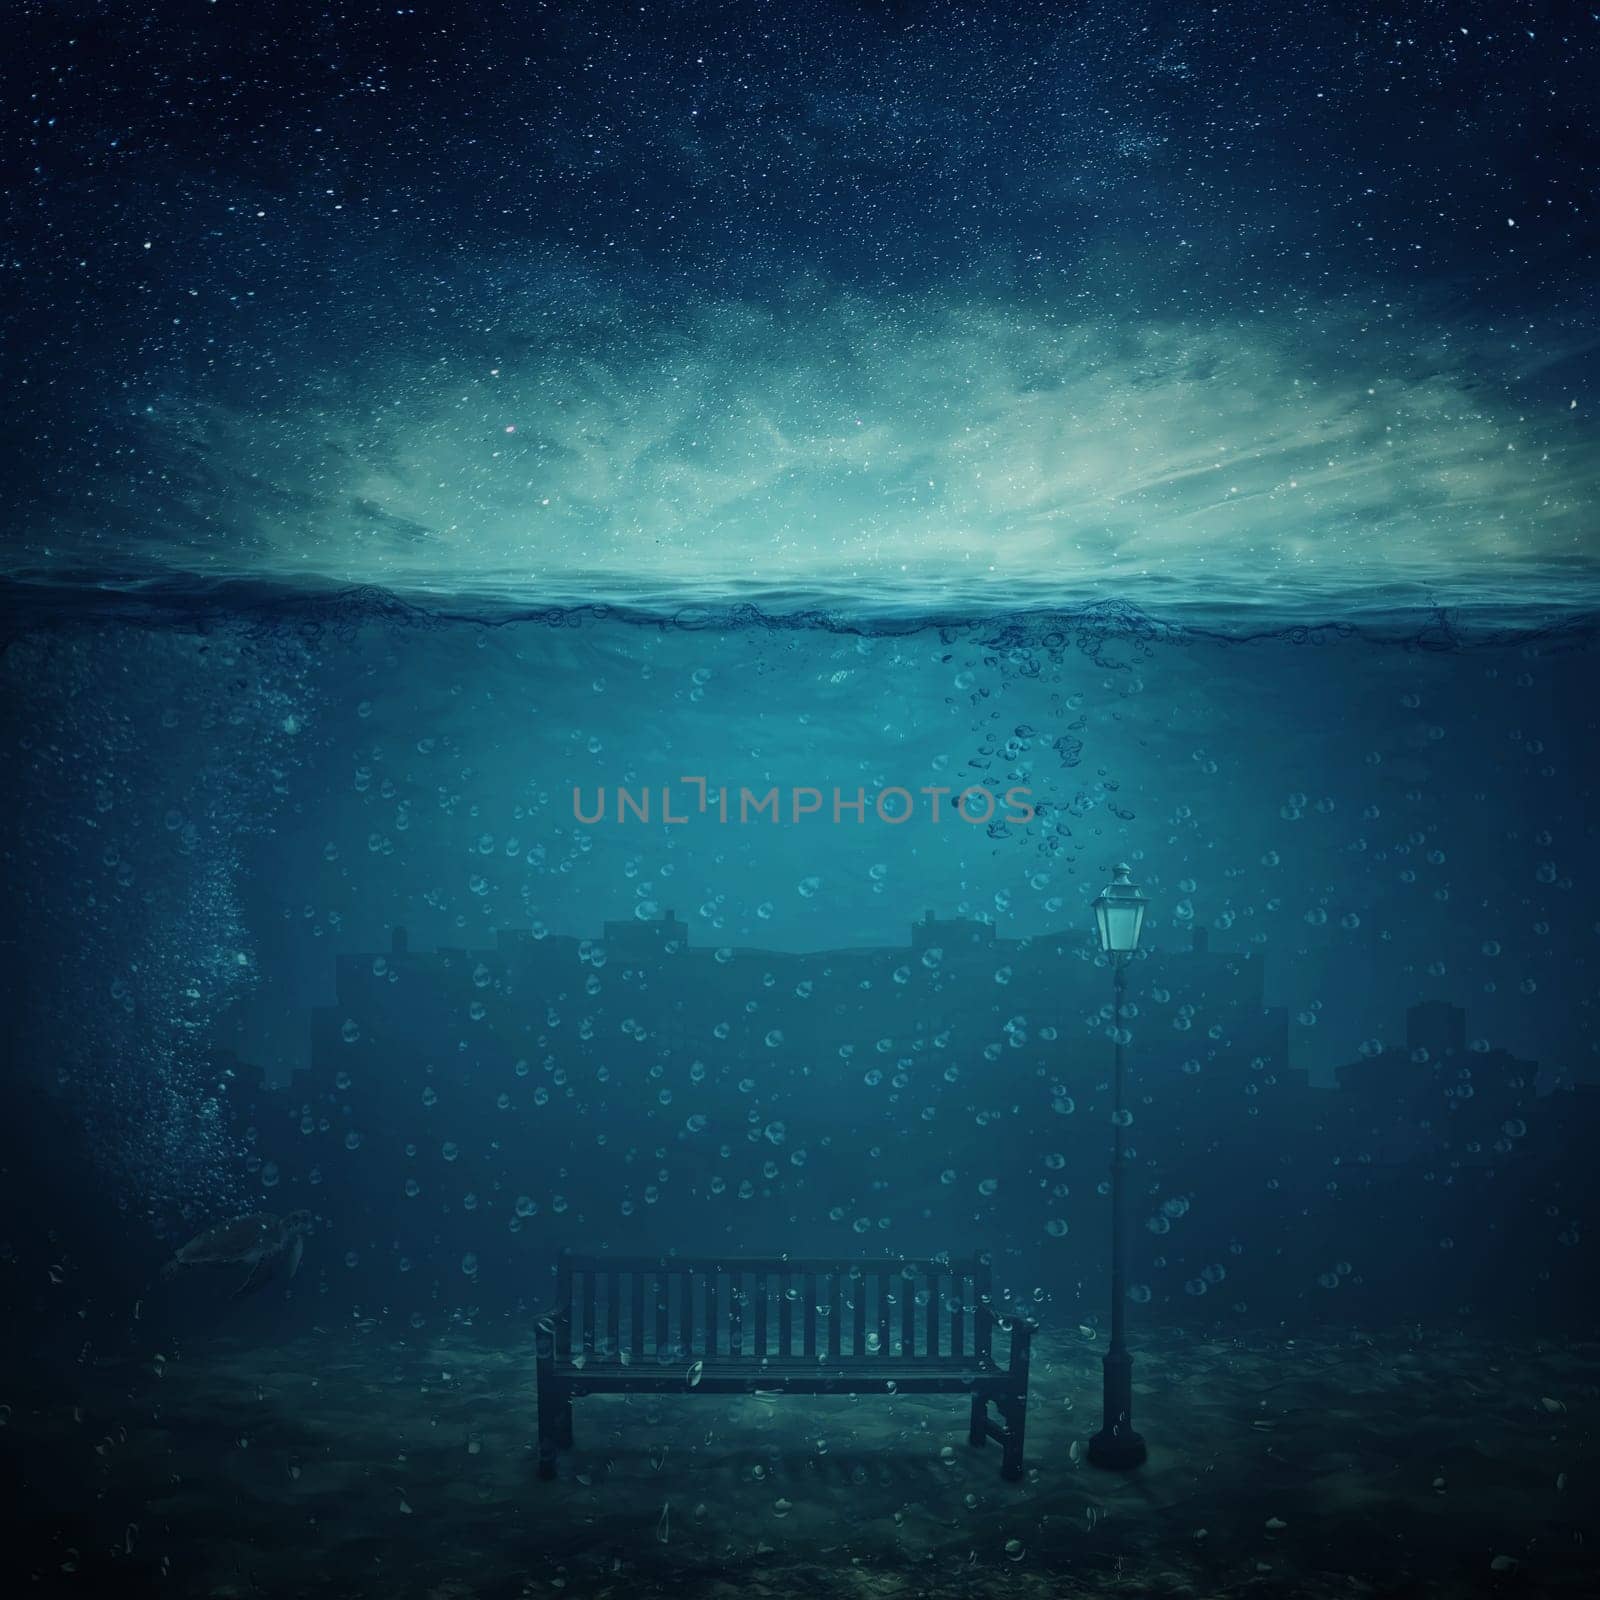 Underwater fantasy world. Modern city ruins under the sea and a wooden bench with a street lamp drowned. Adventure and journey concept of marine life. Night scene with starry sky.